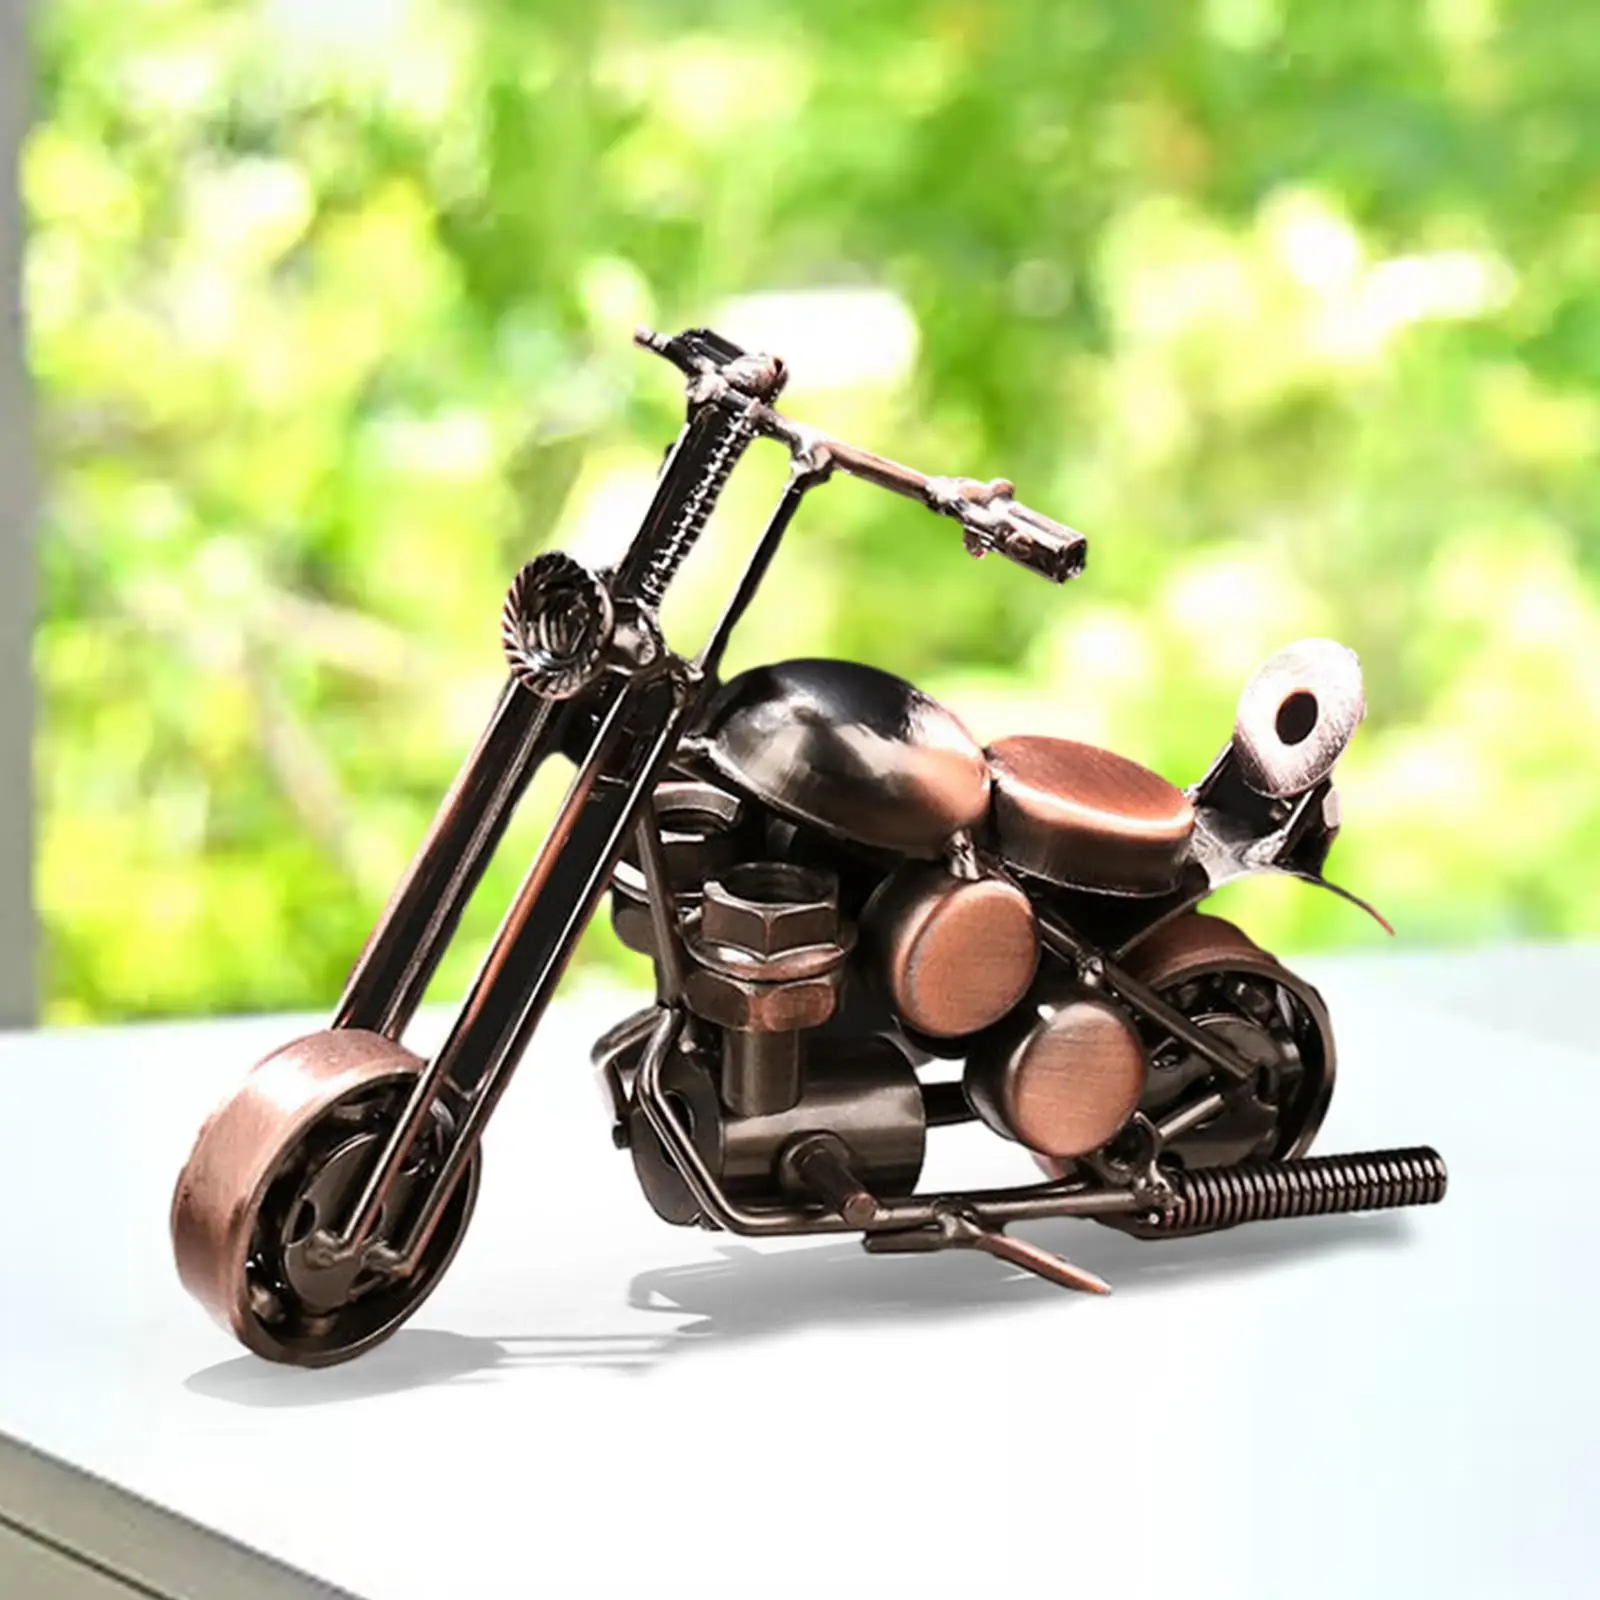 Motorcycle model collection figure, creative decoration, retro style, motorcycle